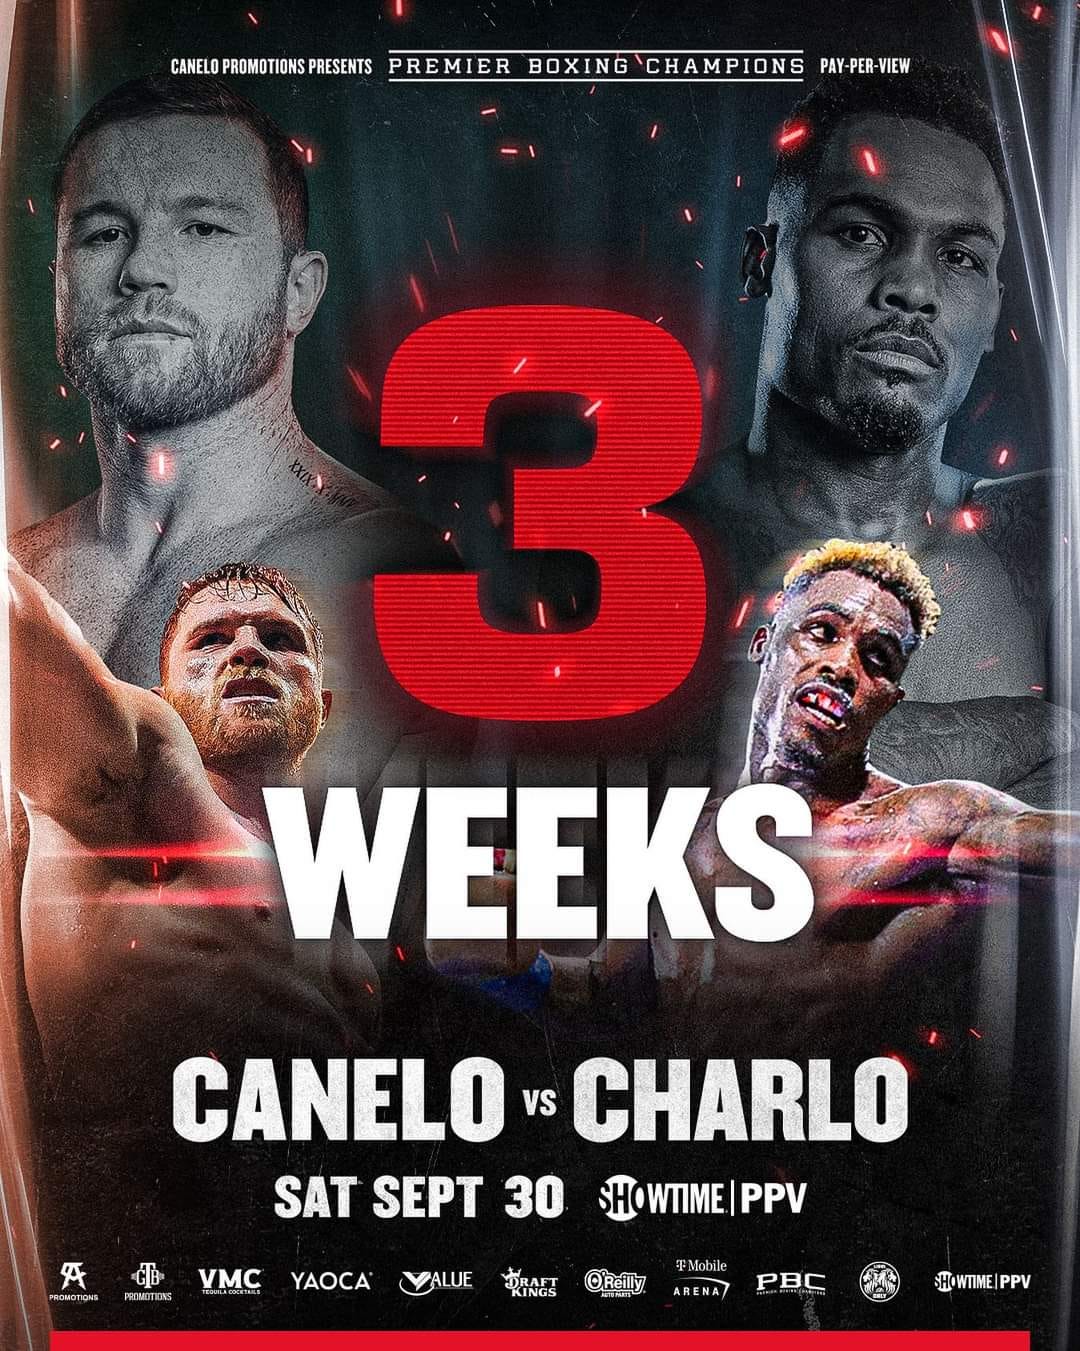 Countdown to Pugilistic Fireworks #CaneloCharlo on Showtime PPV Approaches/